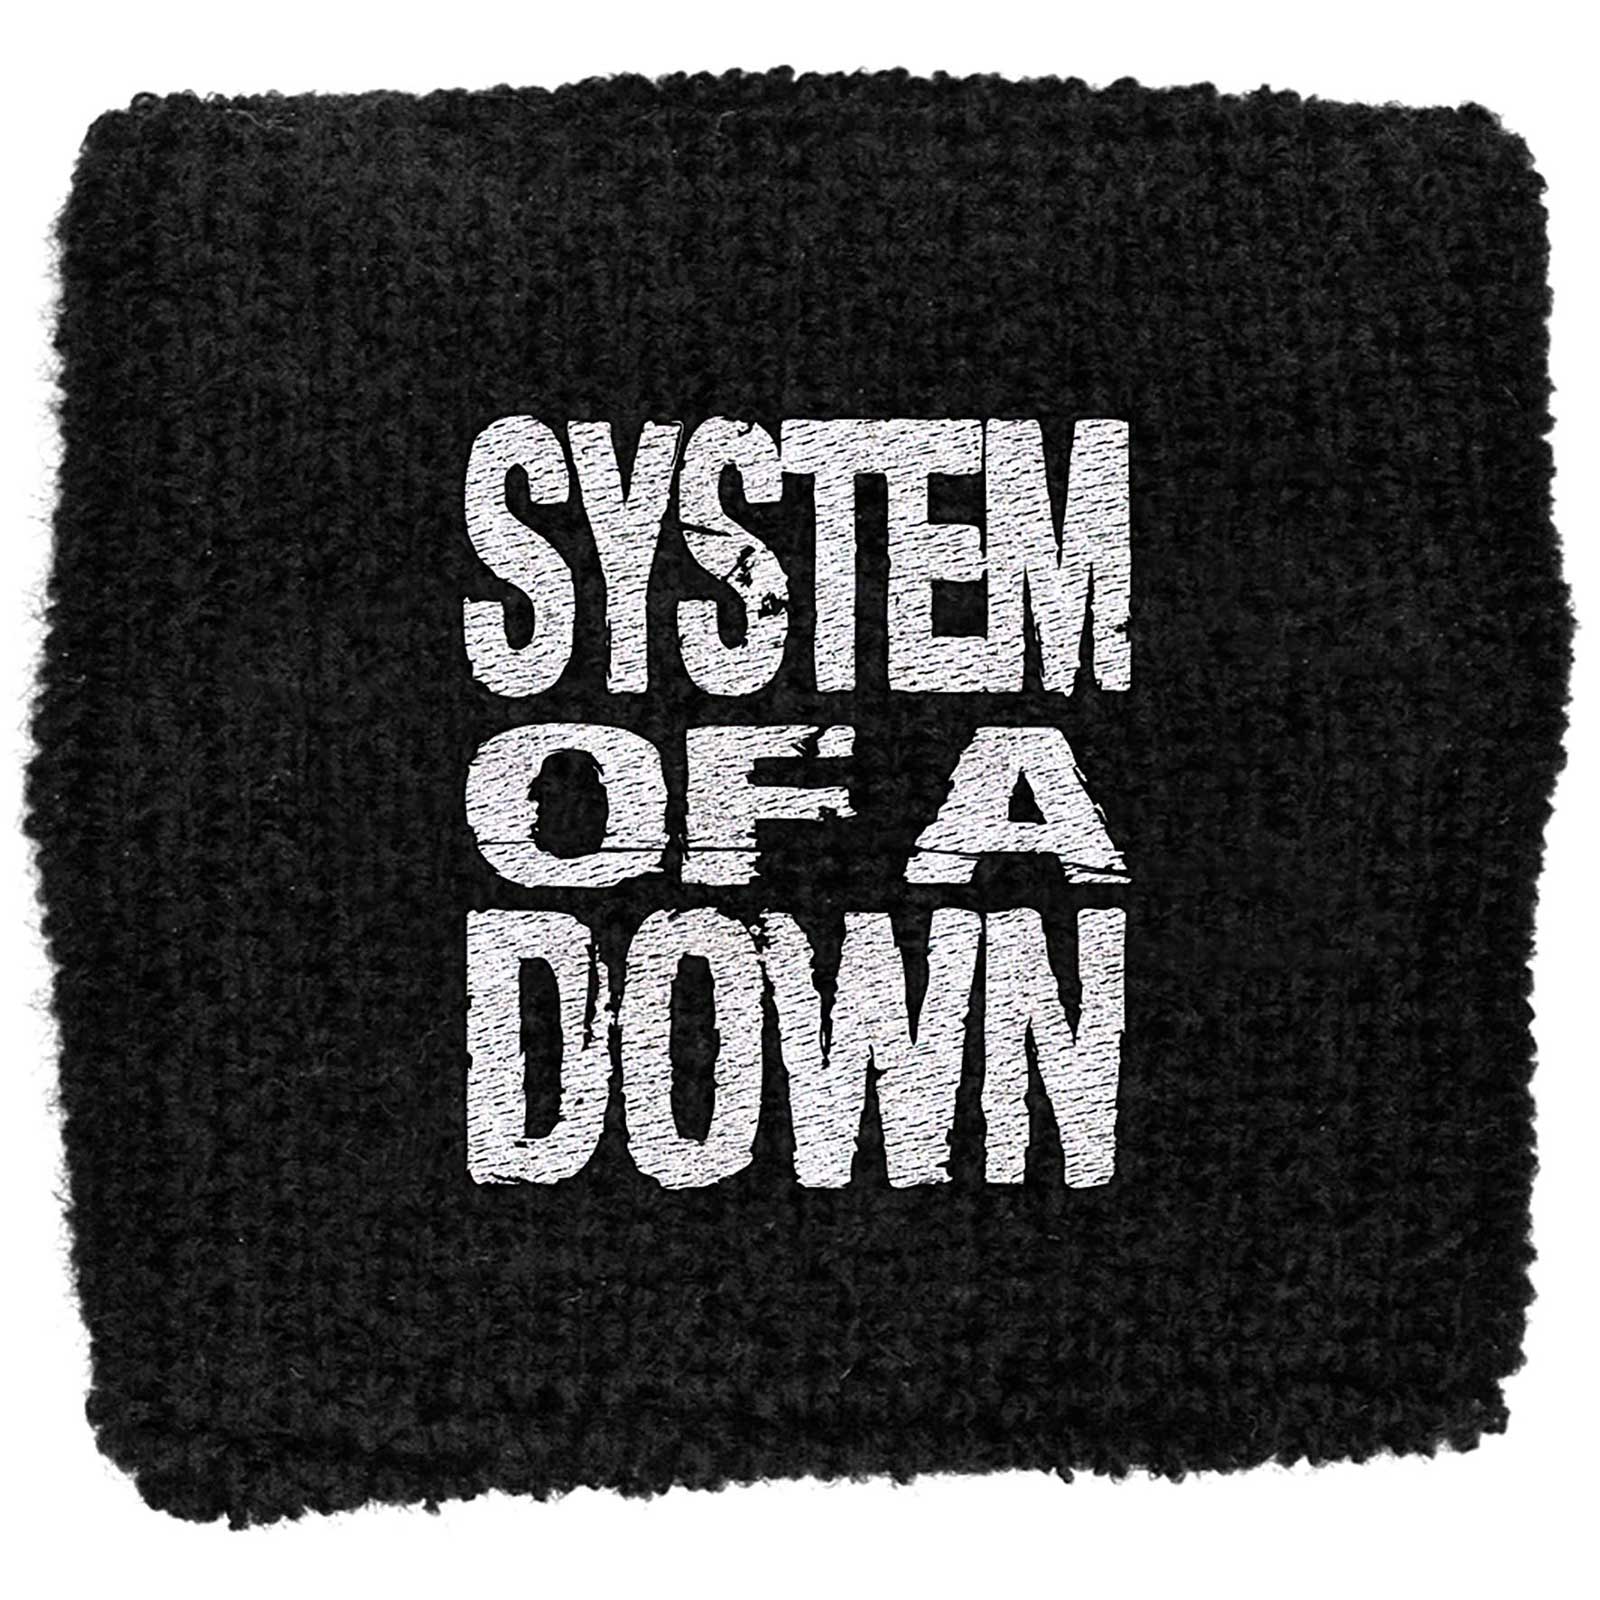 SYSTEM OF A DOWN Logo